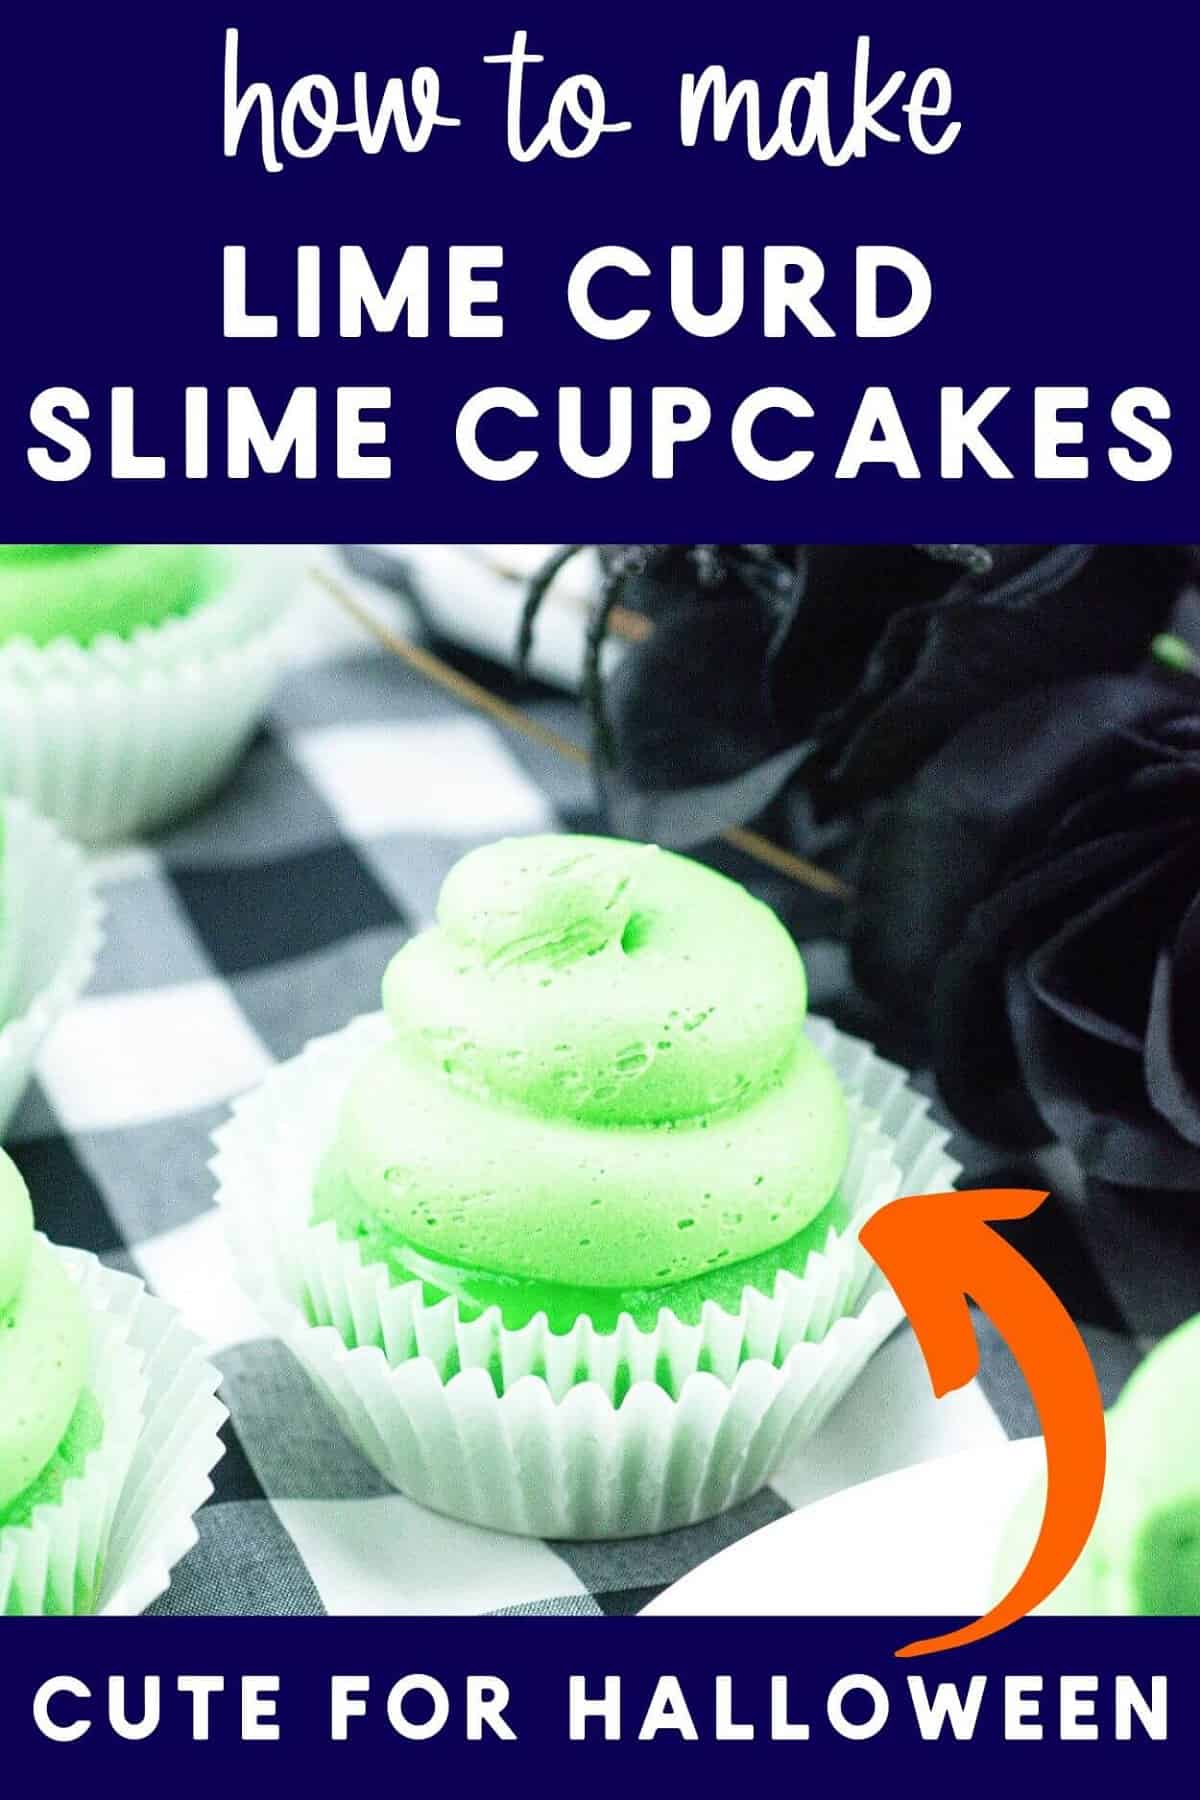 Vertical image of a green lime curd slime cupcake on a black and white buffalo napkin next to faux black roses.